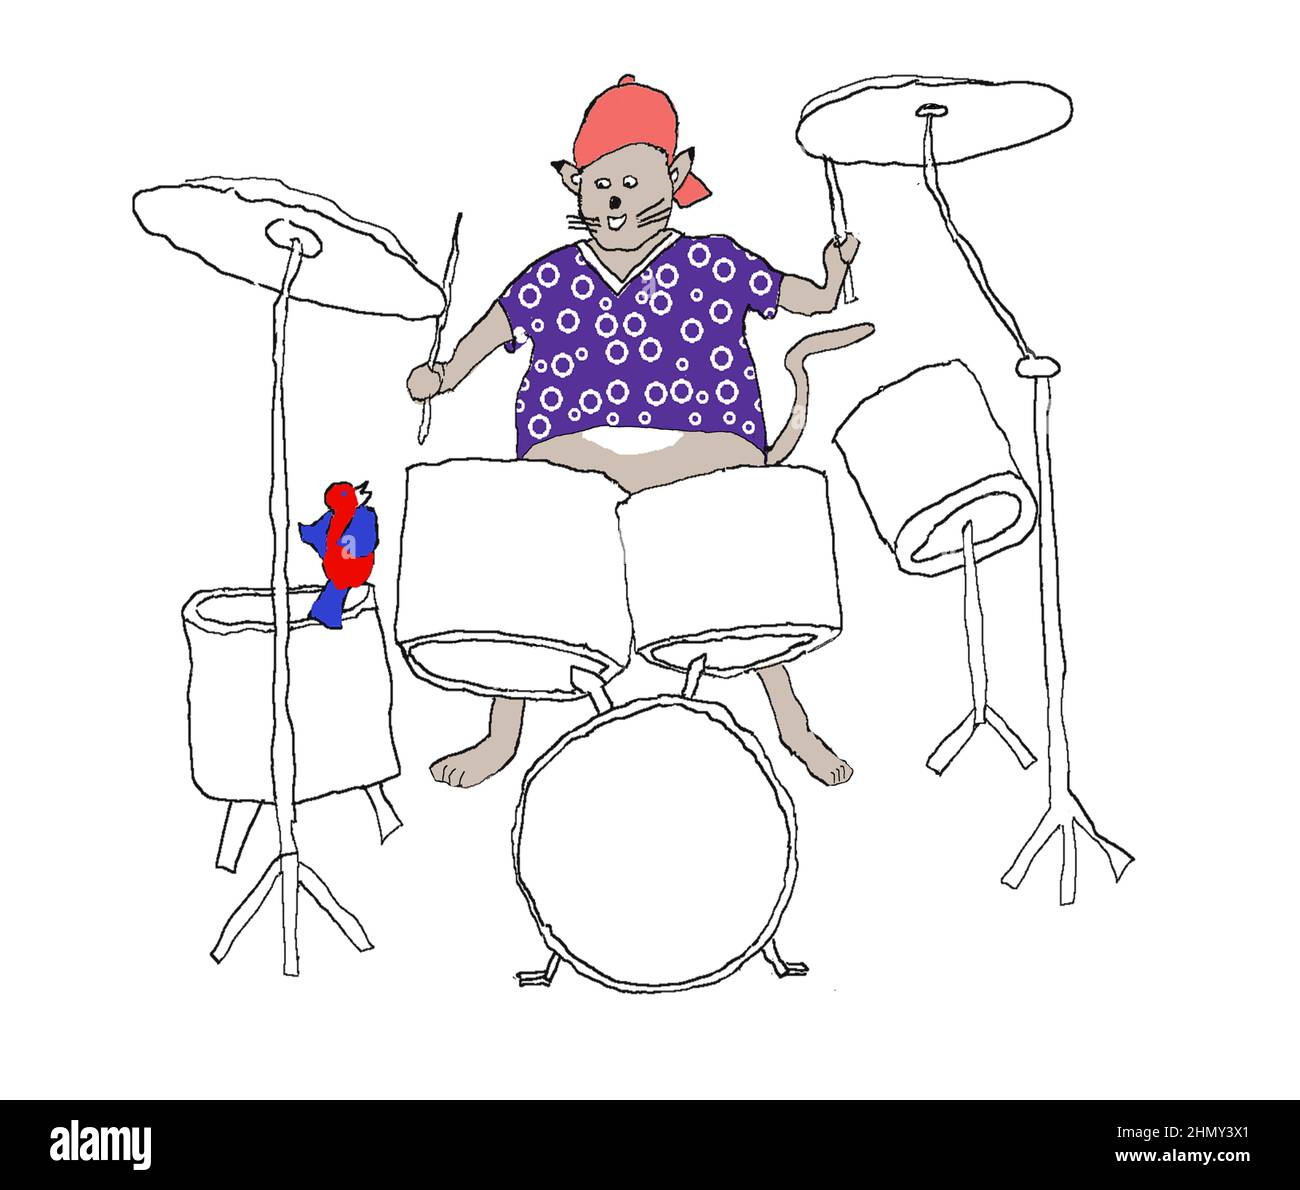 Cartoon of cat playing drums Stock Photo